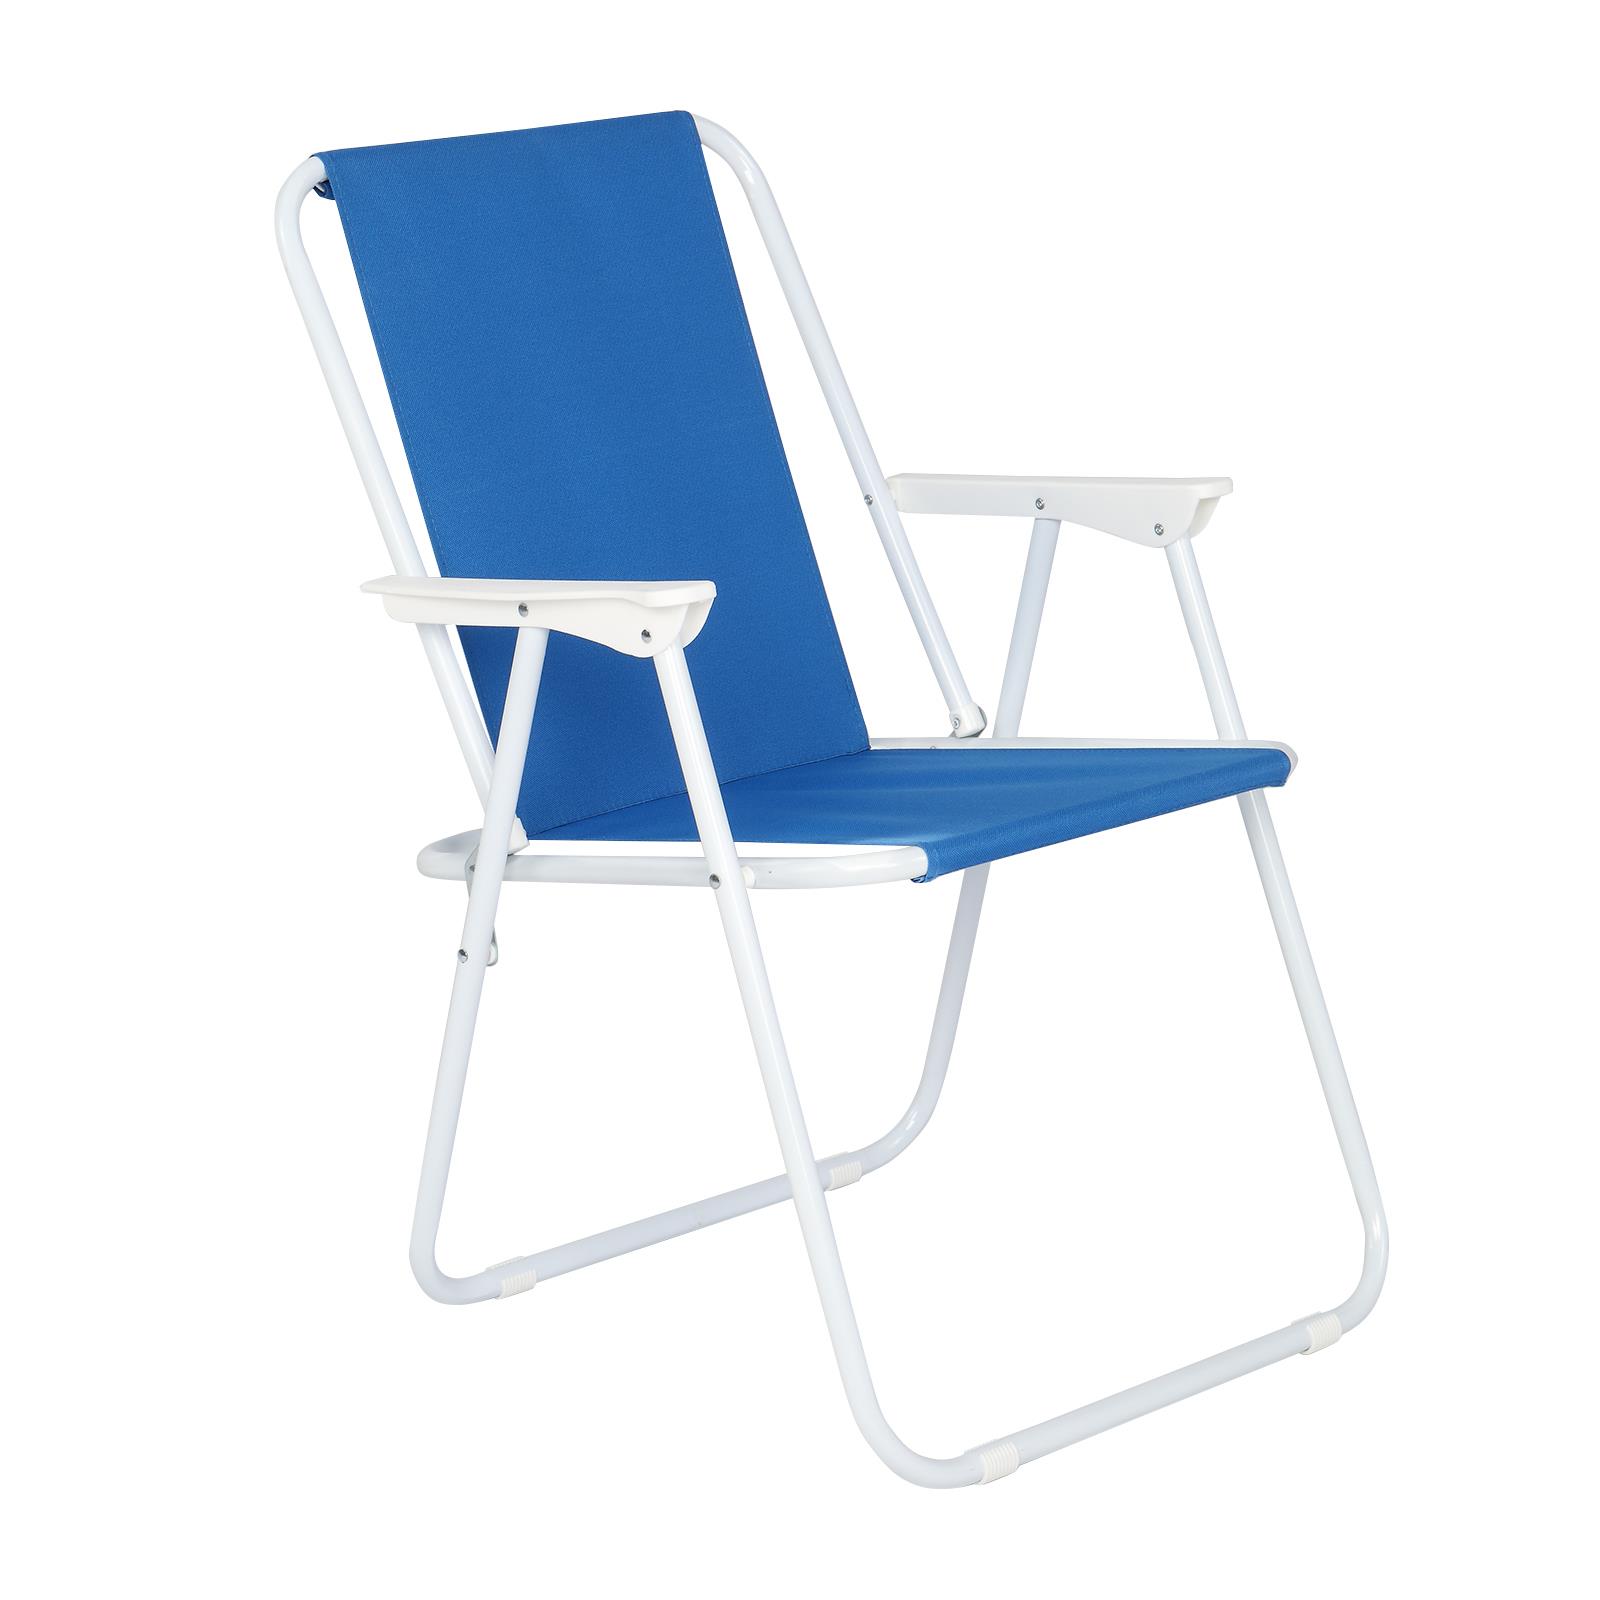 OverPatio Portable Beach Chair Folding Solid Construction Camping - image 1 of 8